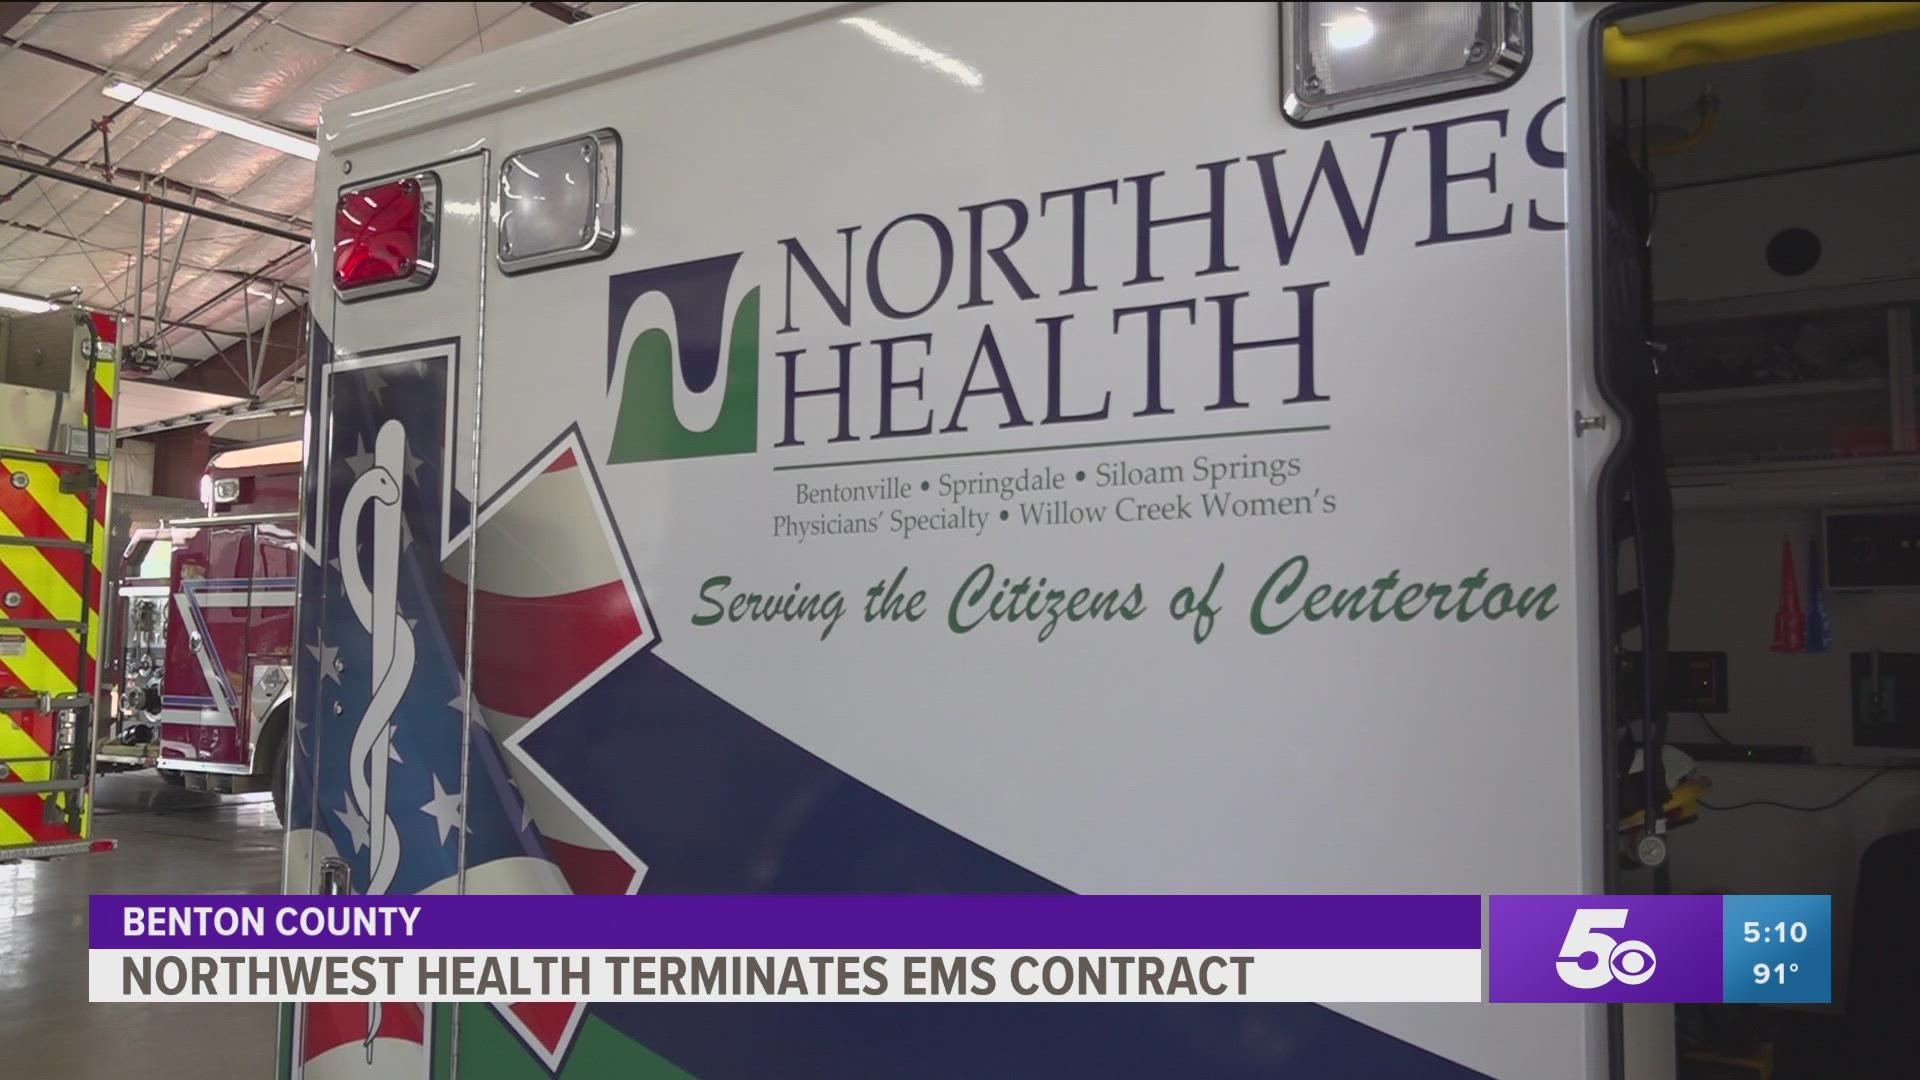 About 50,000 people in Benton County will soon have a new ambulance provider.